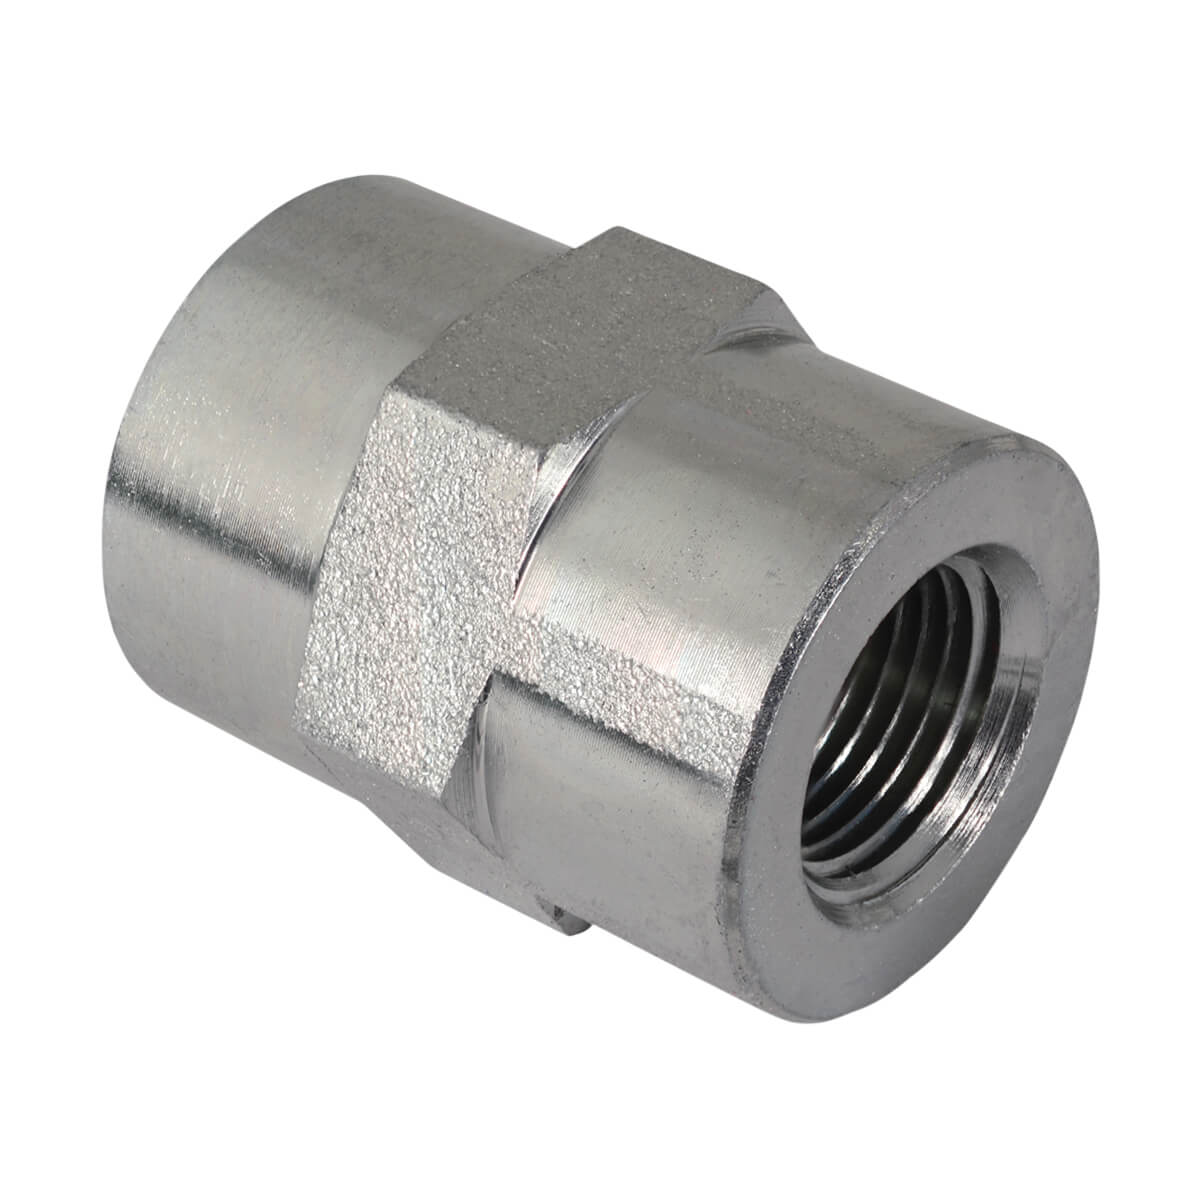 Female Pipe Thread Hydraulic Adapter - 3/8-in FPT x 3/8-in